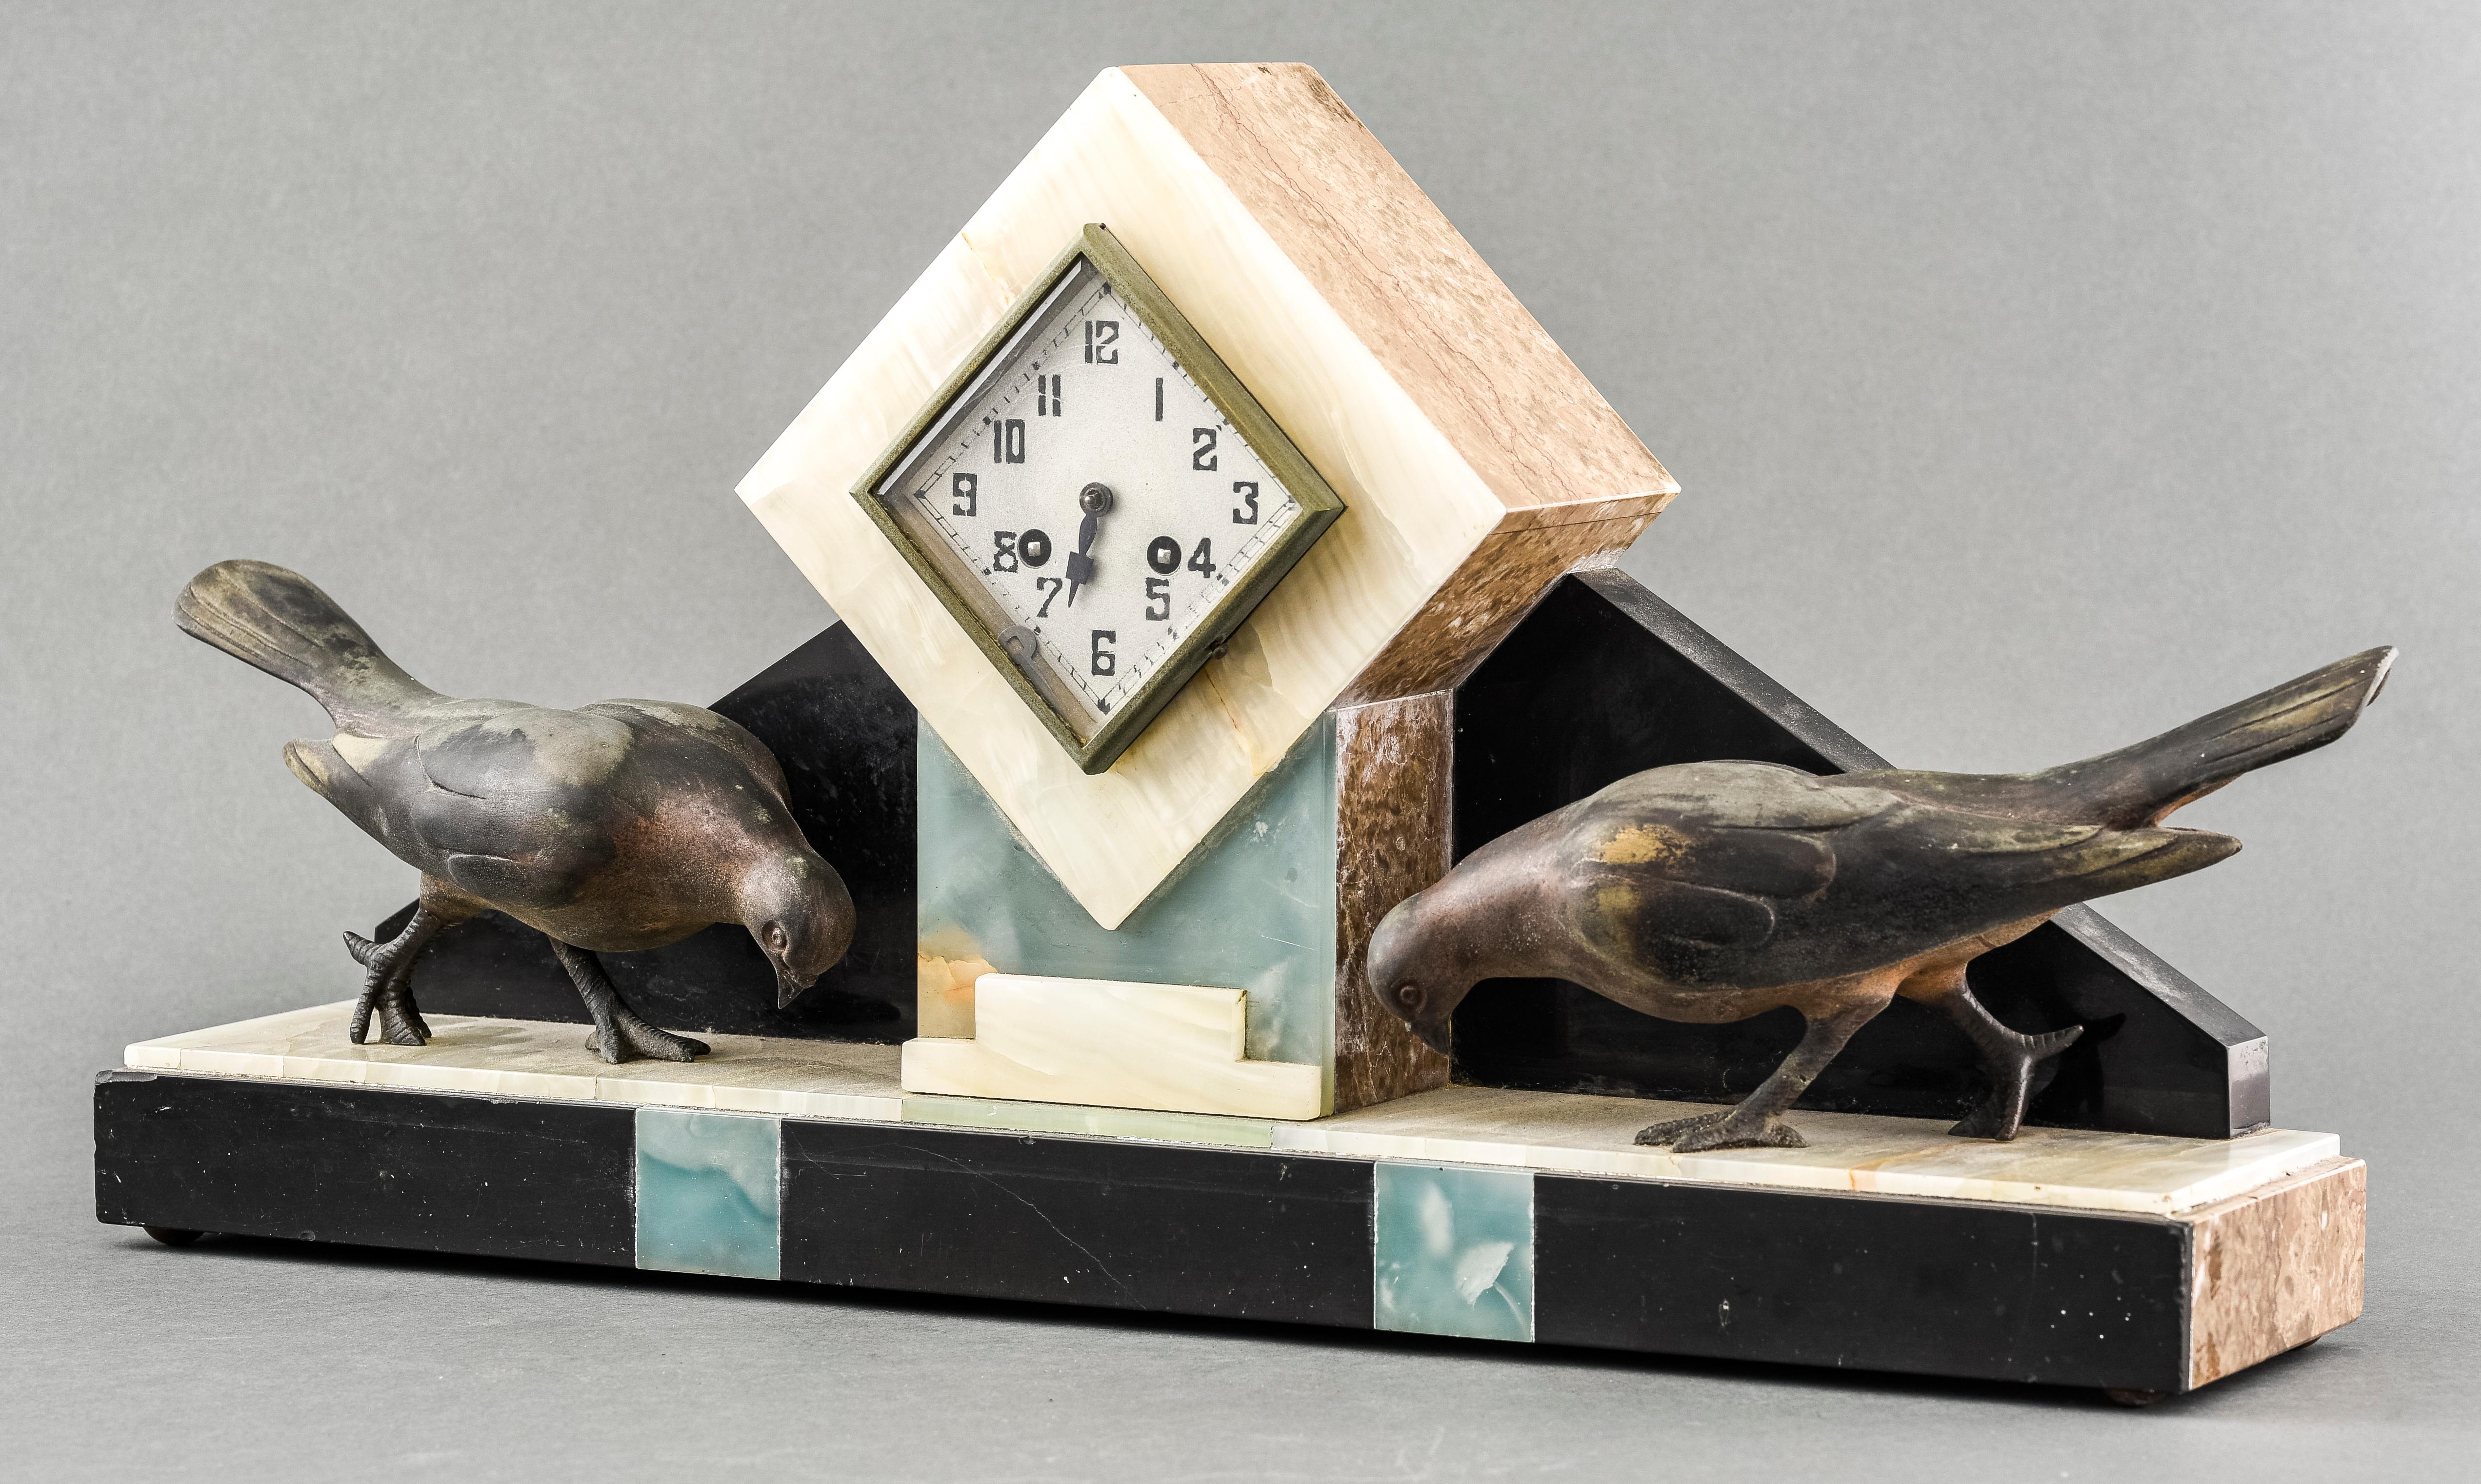 Art Deco onyx and marble three piece clock garniture, circa 1930, with patinated birds and geometric details, the clock face with Arabic numerals and two wind holes. Clock 13” H x 24” W x 5.25” D, Vases 8.25” H x 5.5” W x 4” D.